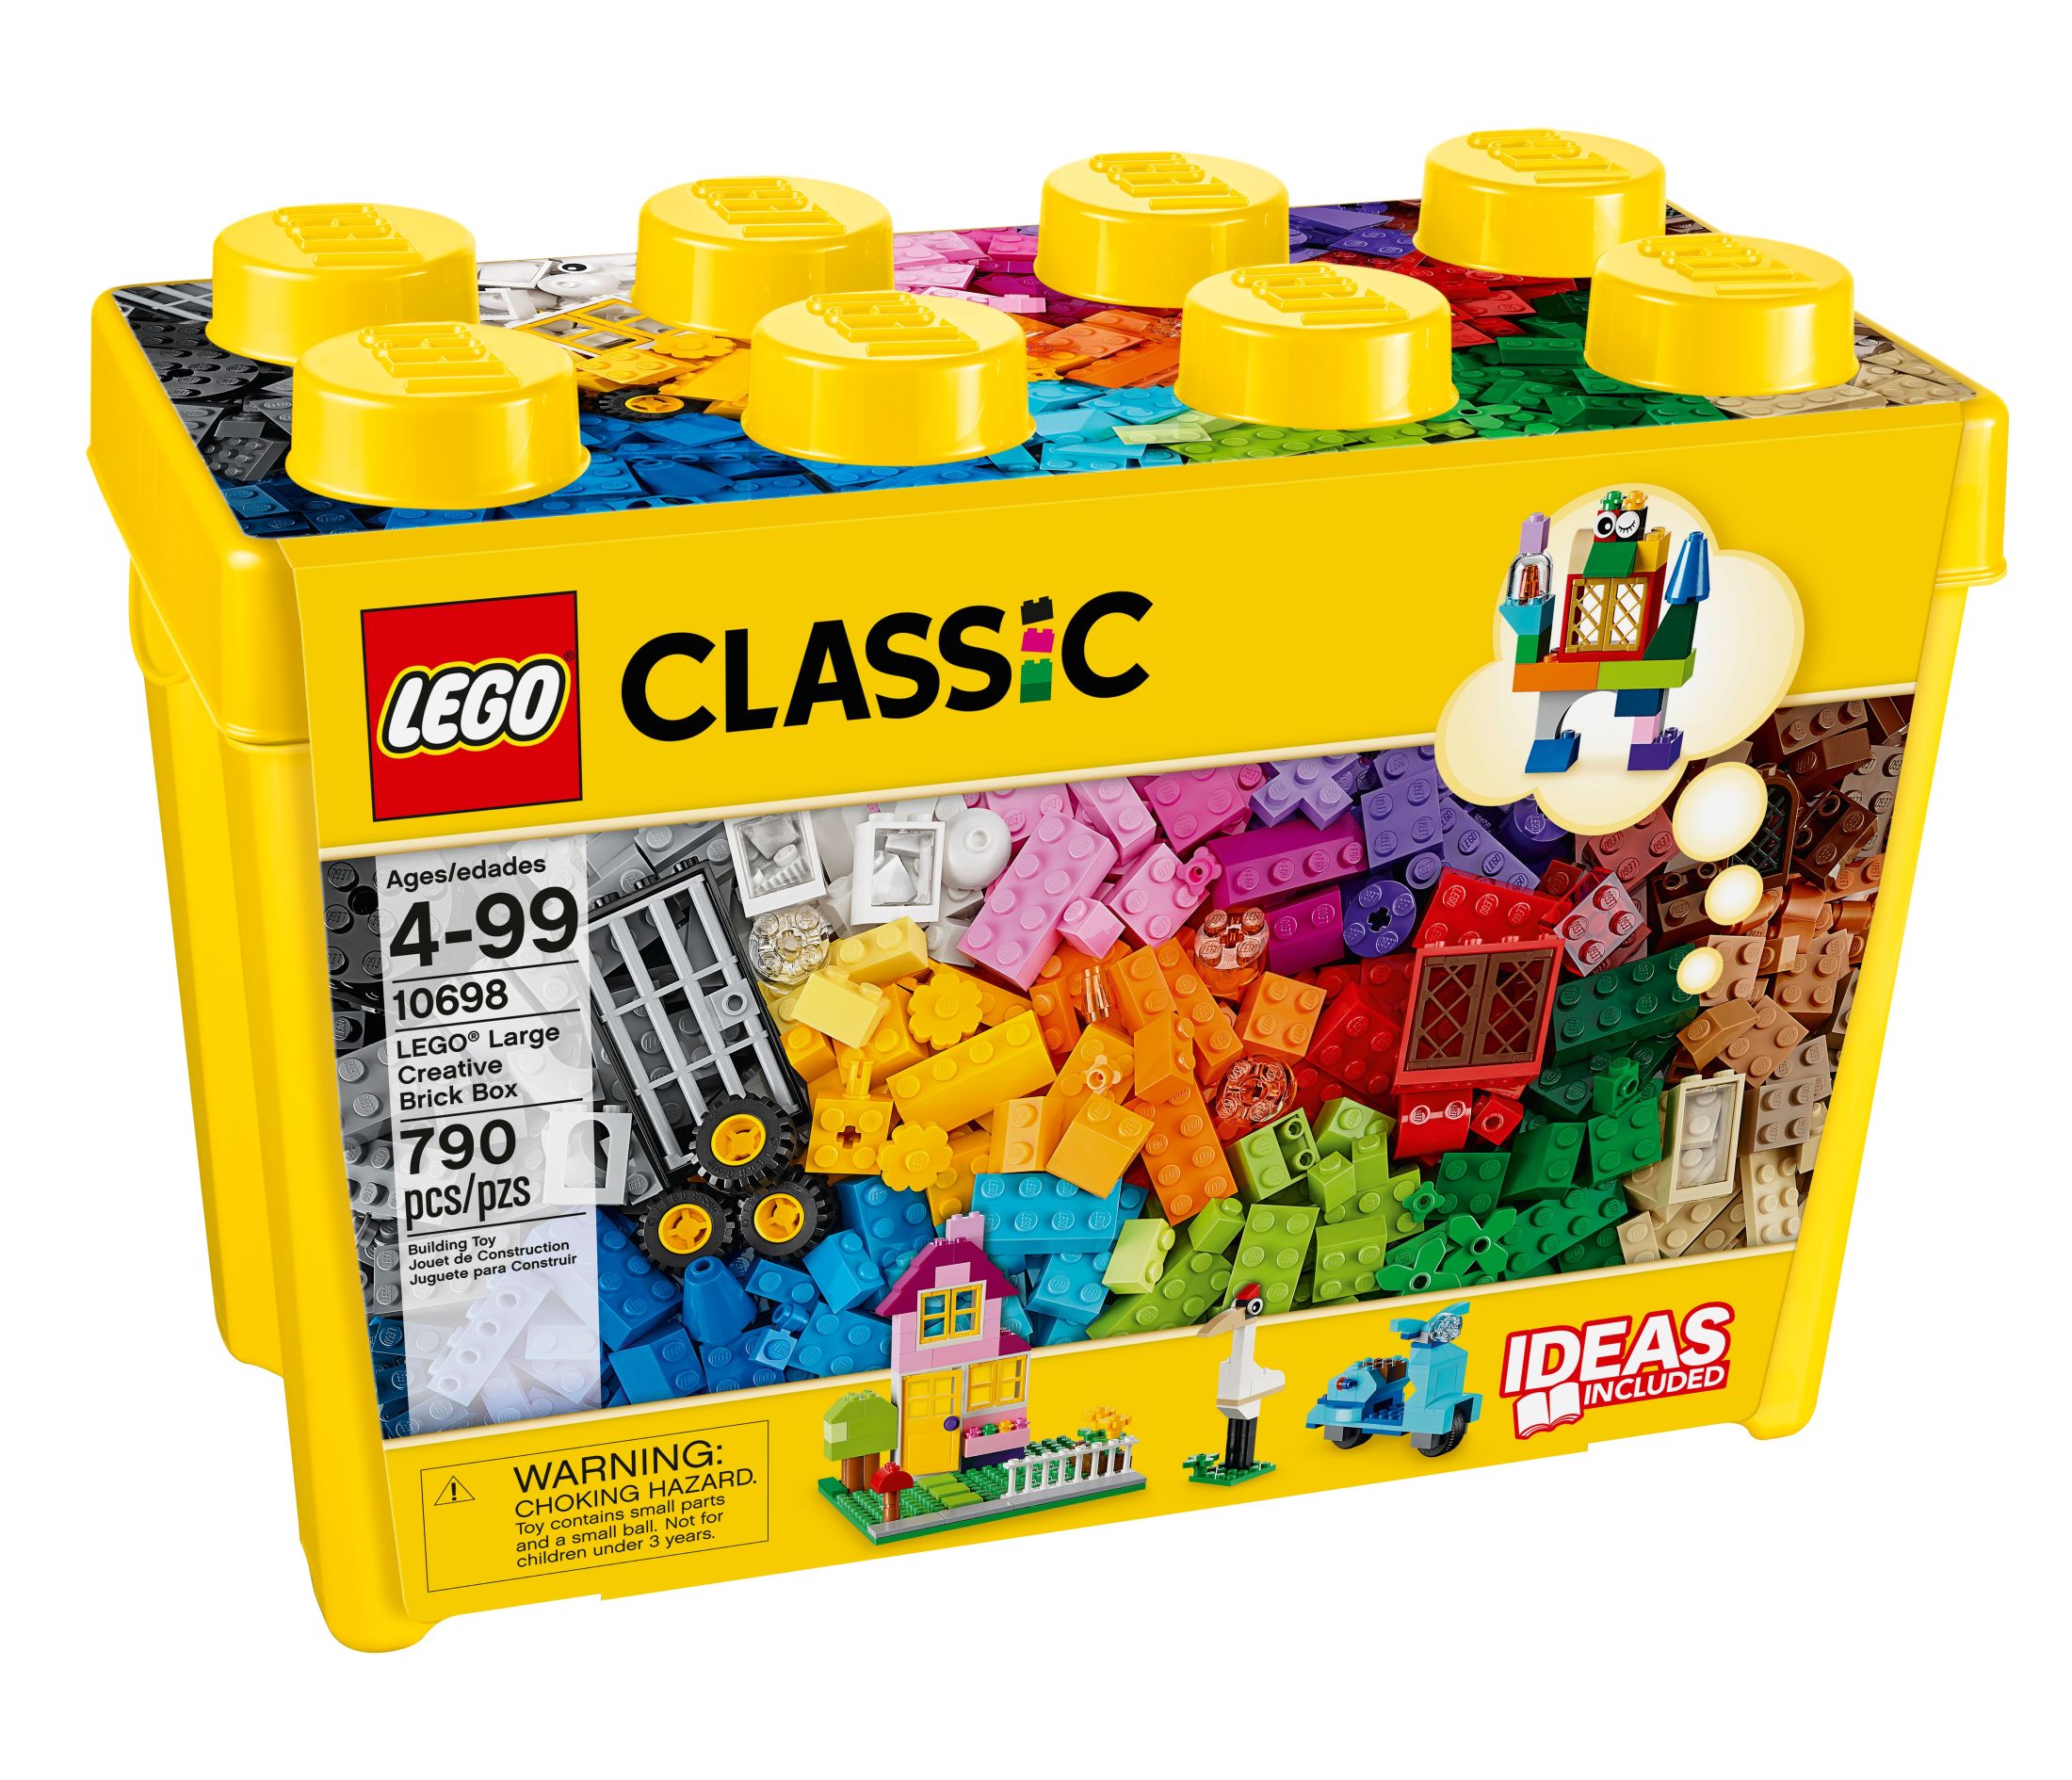 LEGO Classic Large Creative Brick Box 10698 Play and Be Inspired by LEGO Masters, Toy Storage Solution for Home or Classrooms, Interactive Building Toy for Kids, Boys, and Girls - image 3 of 6